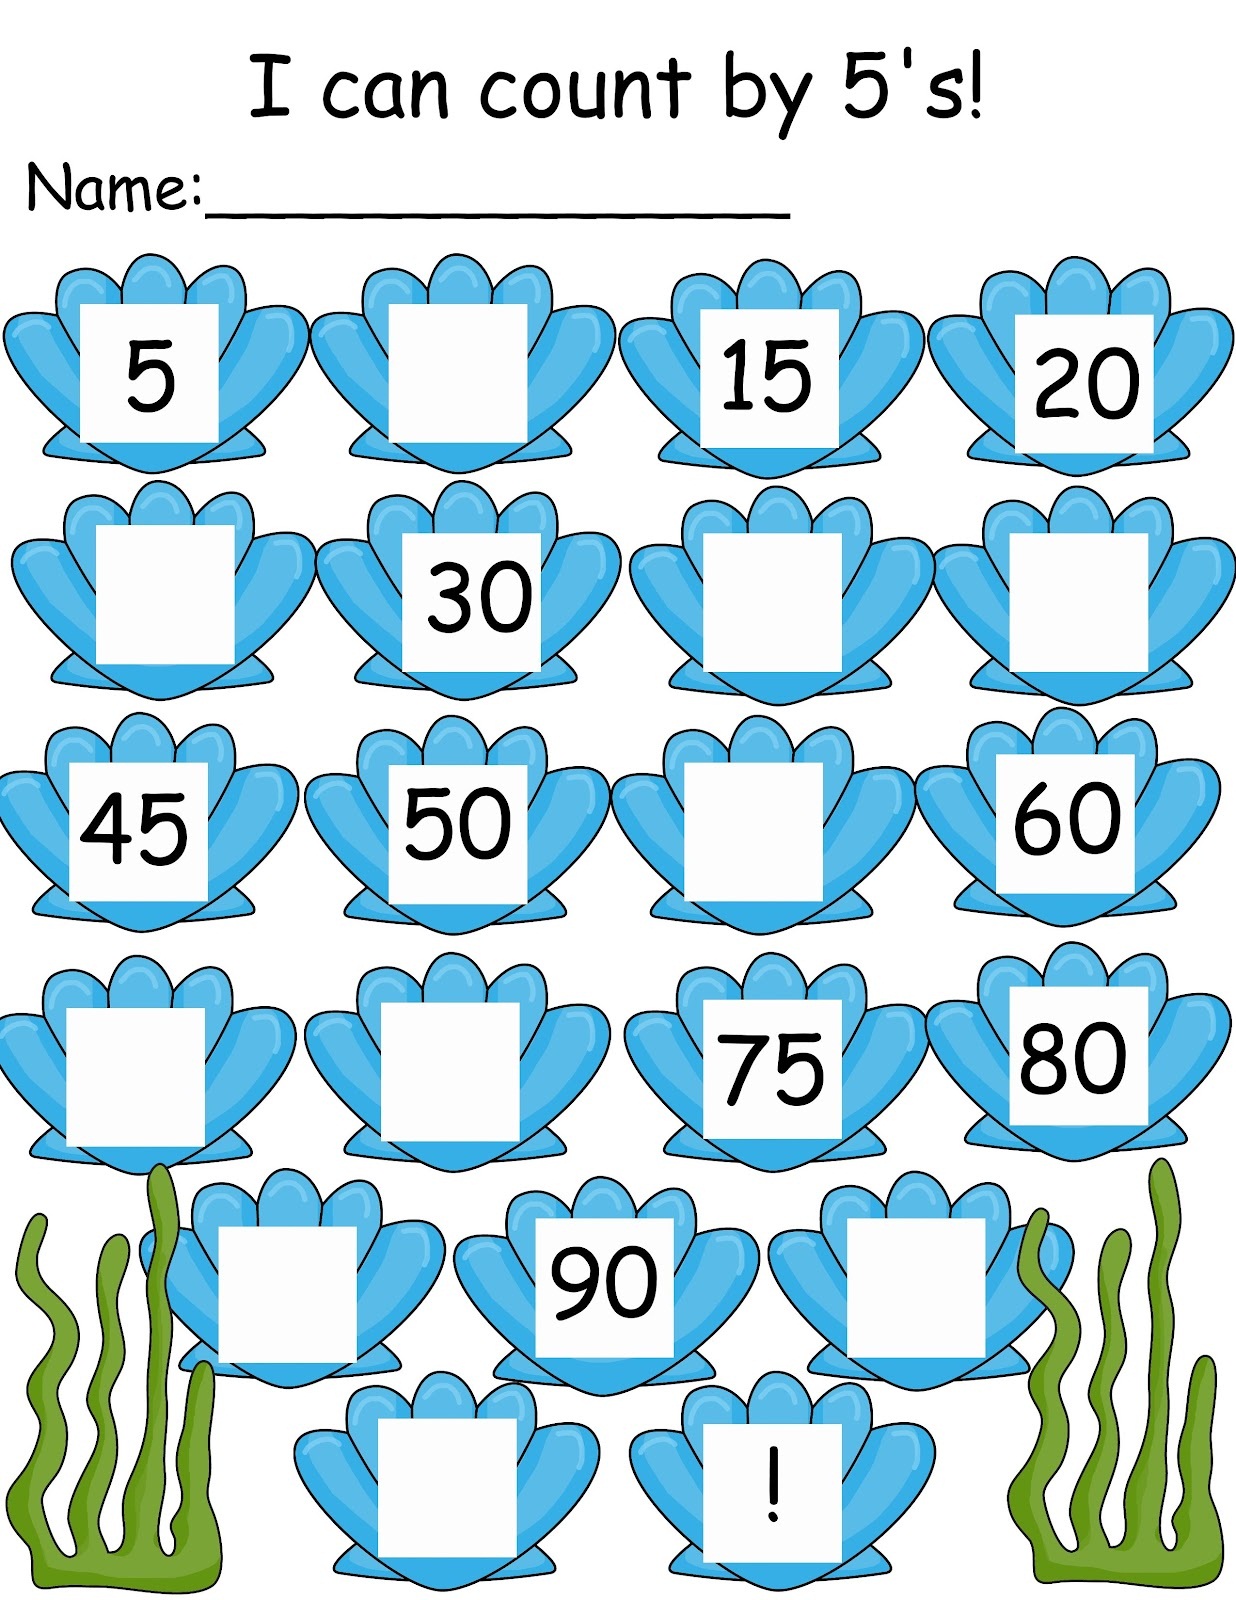 count-by-5s-worksheet-new